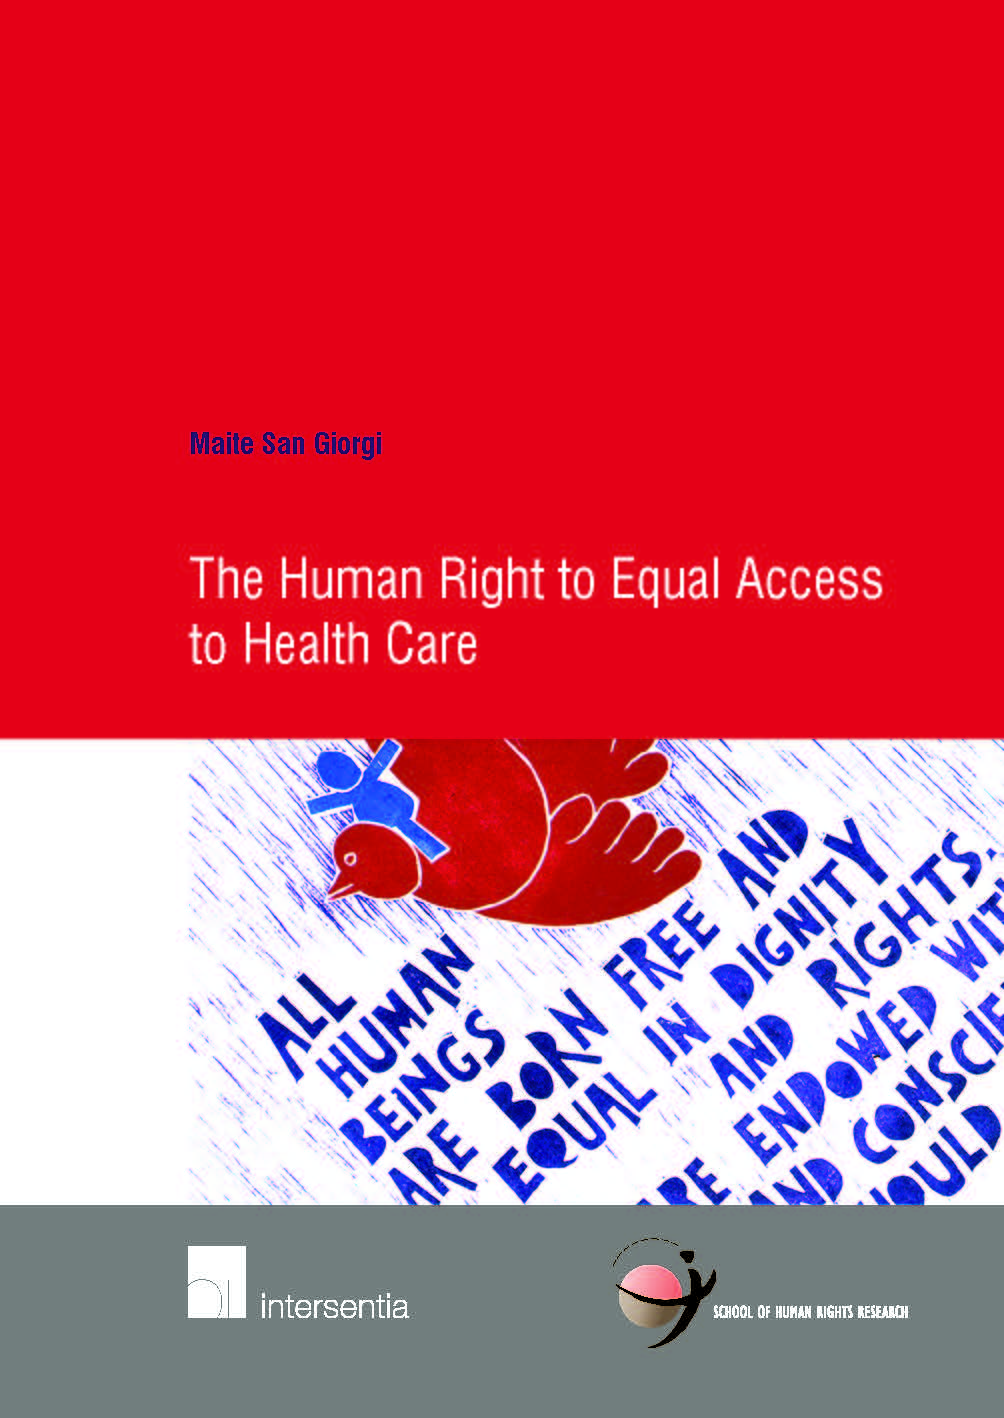 Is access to healthcare a right or a privilege